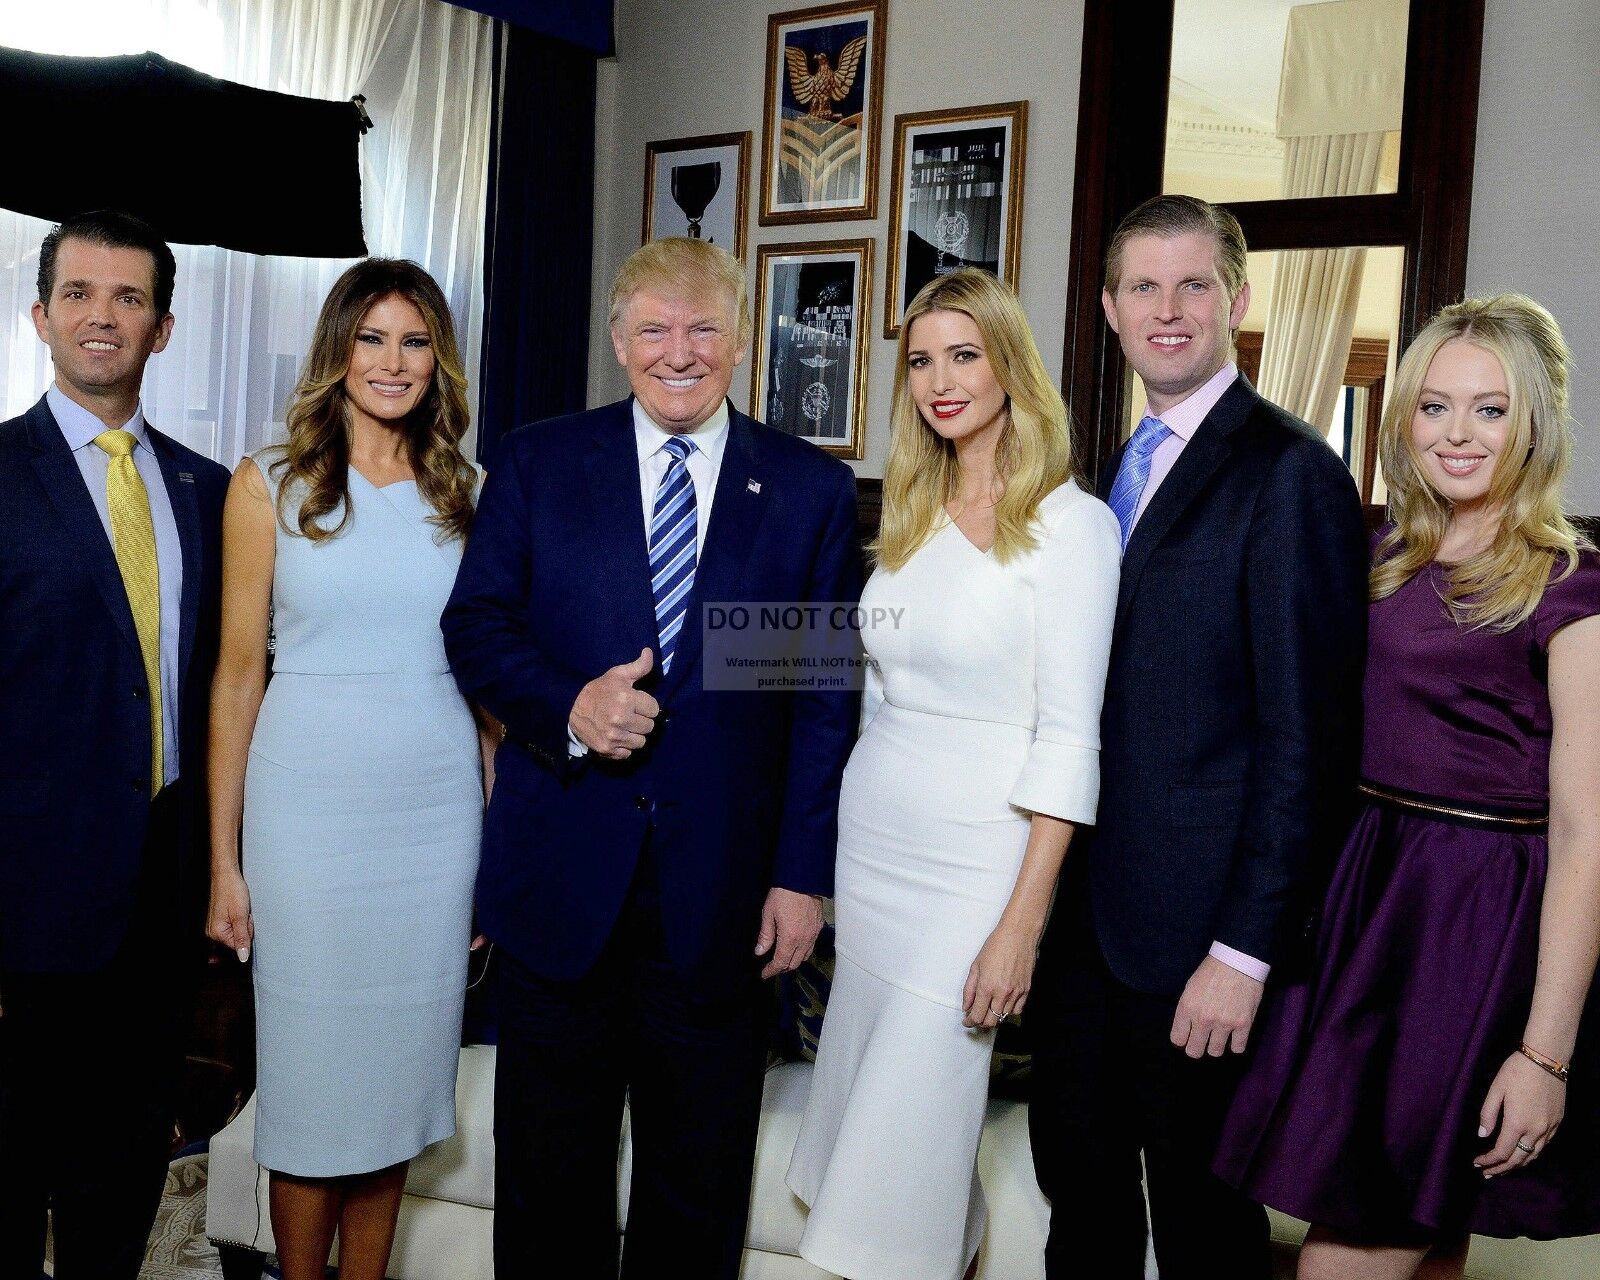 THE FAMILY OF DONALD TRUMP - 8X10 PHOTO (YW006)